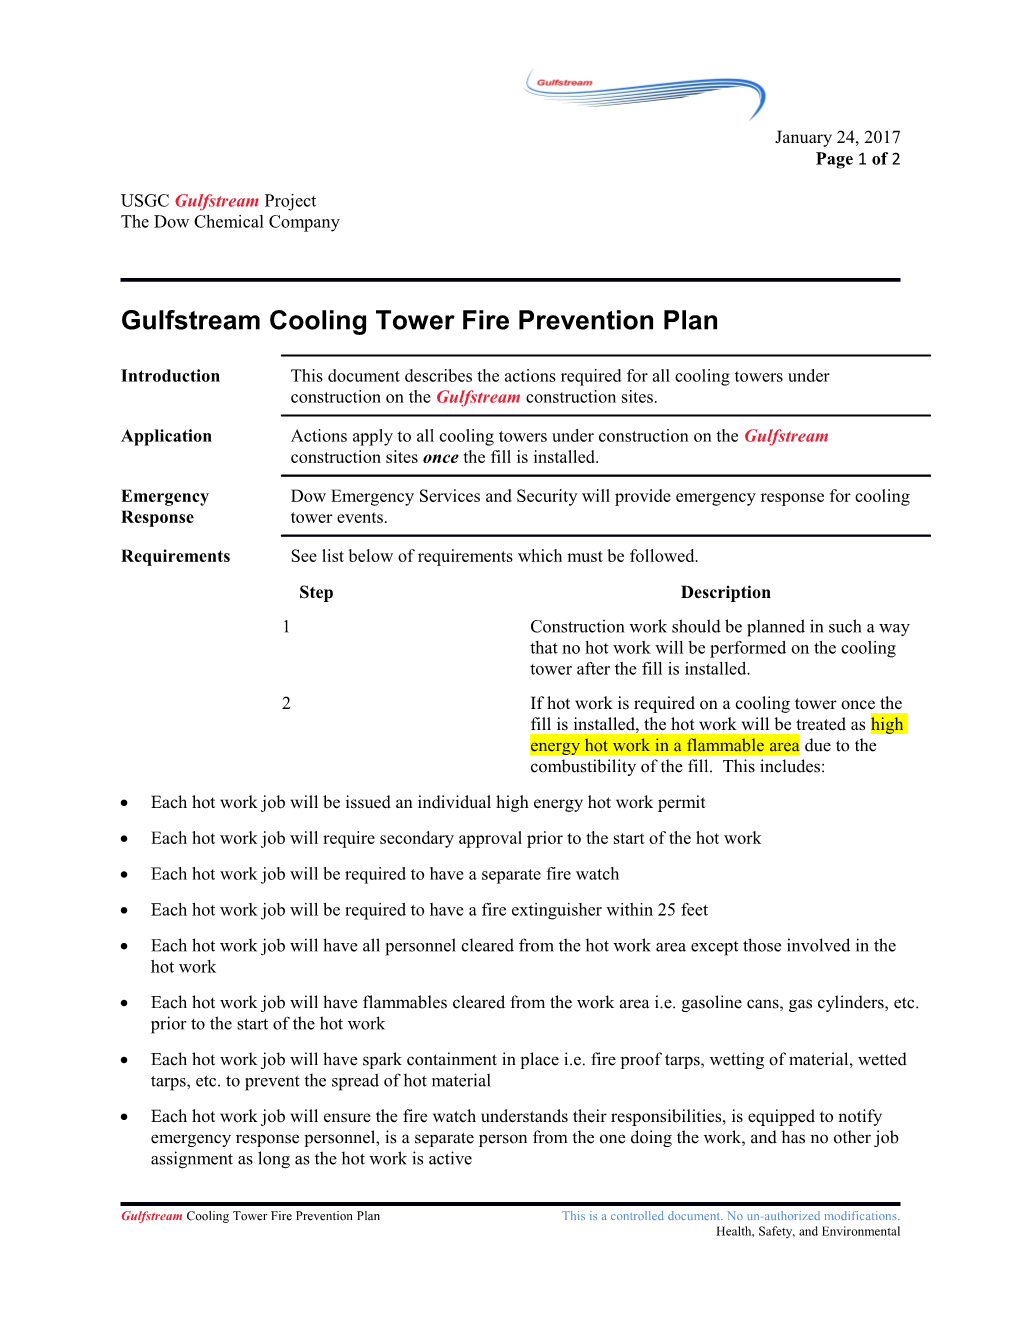 Gulfstream Cooling Tower Fire Prevention Plan